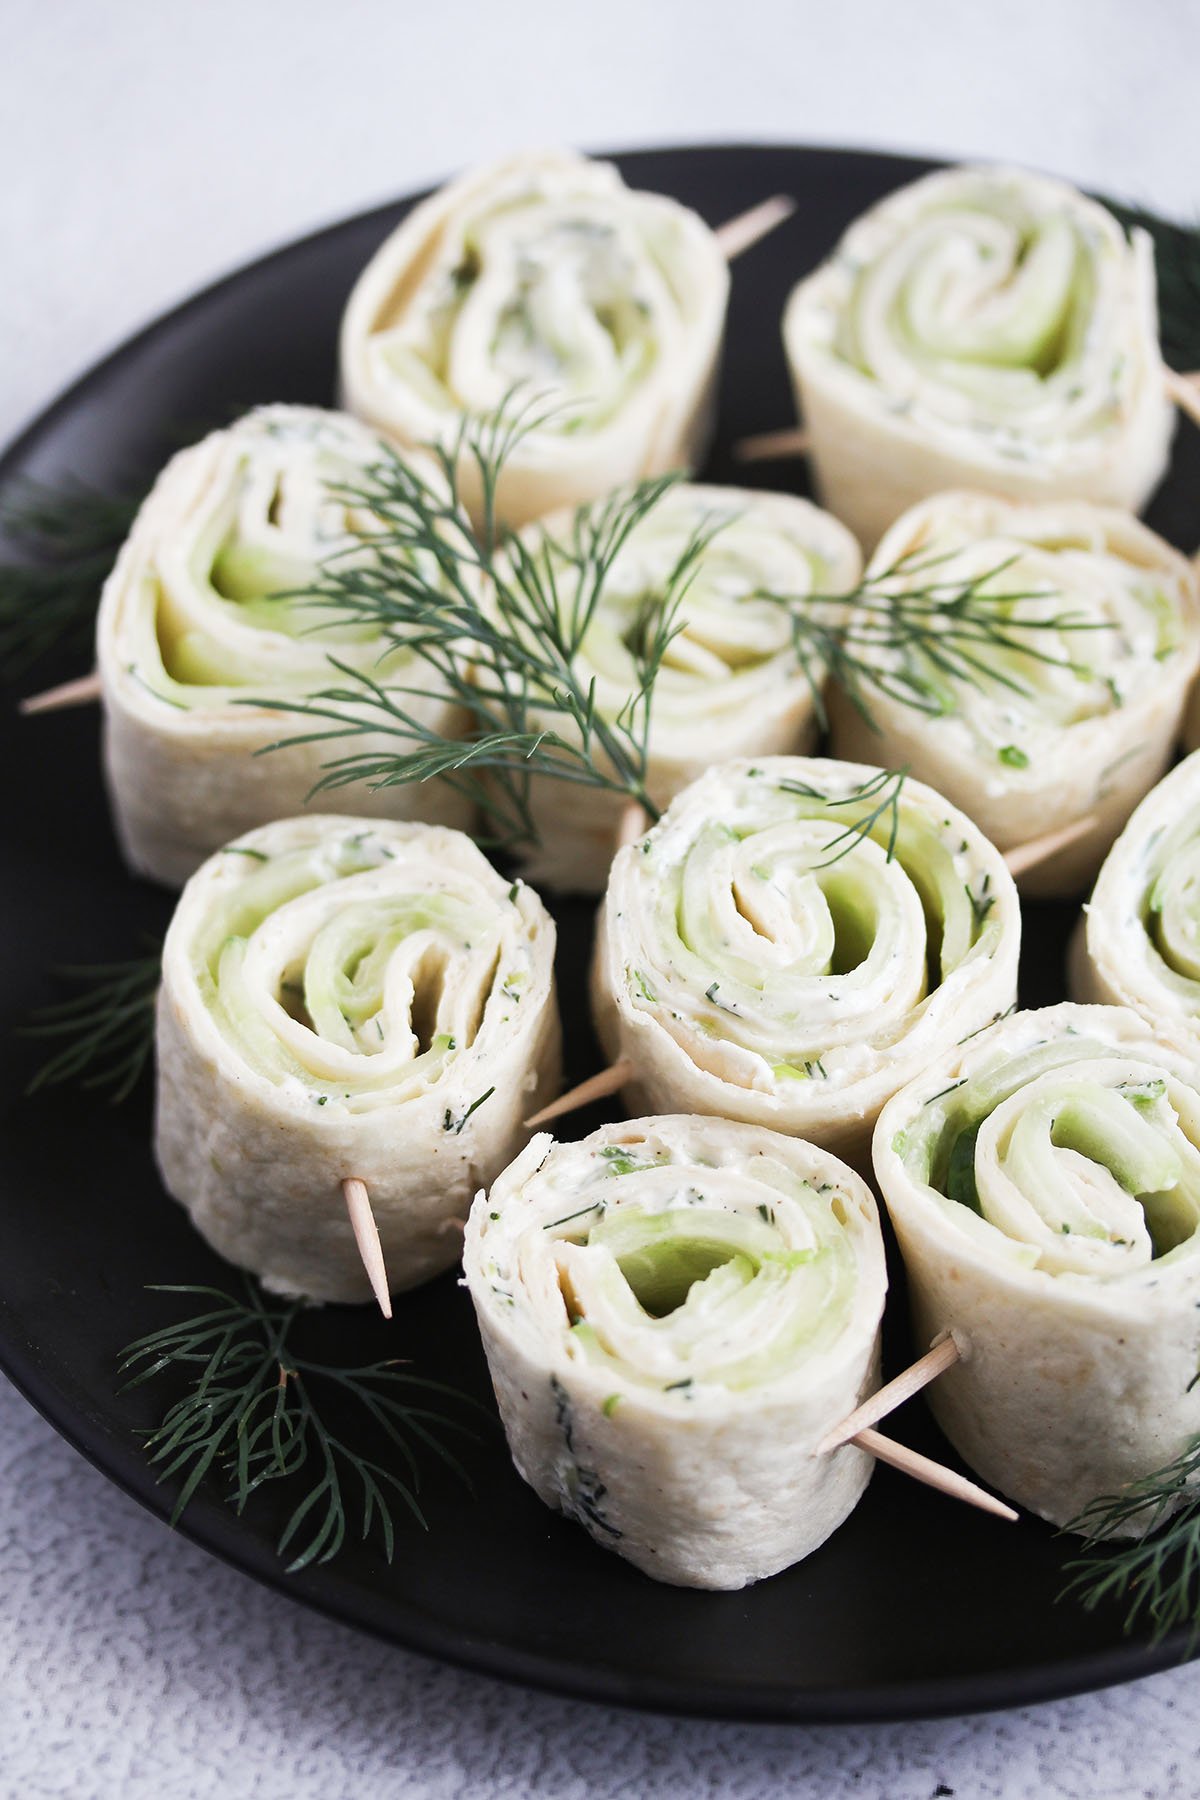 cucumber wraps with cream cheee and dill on toothpicks.